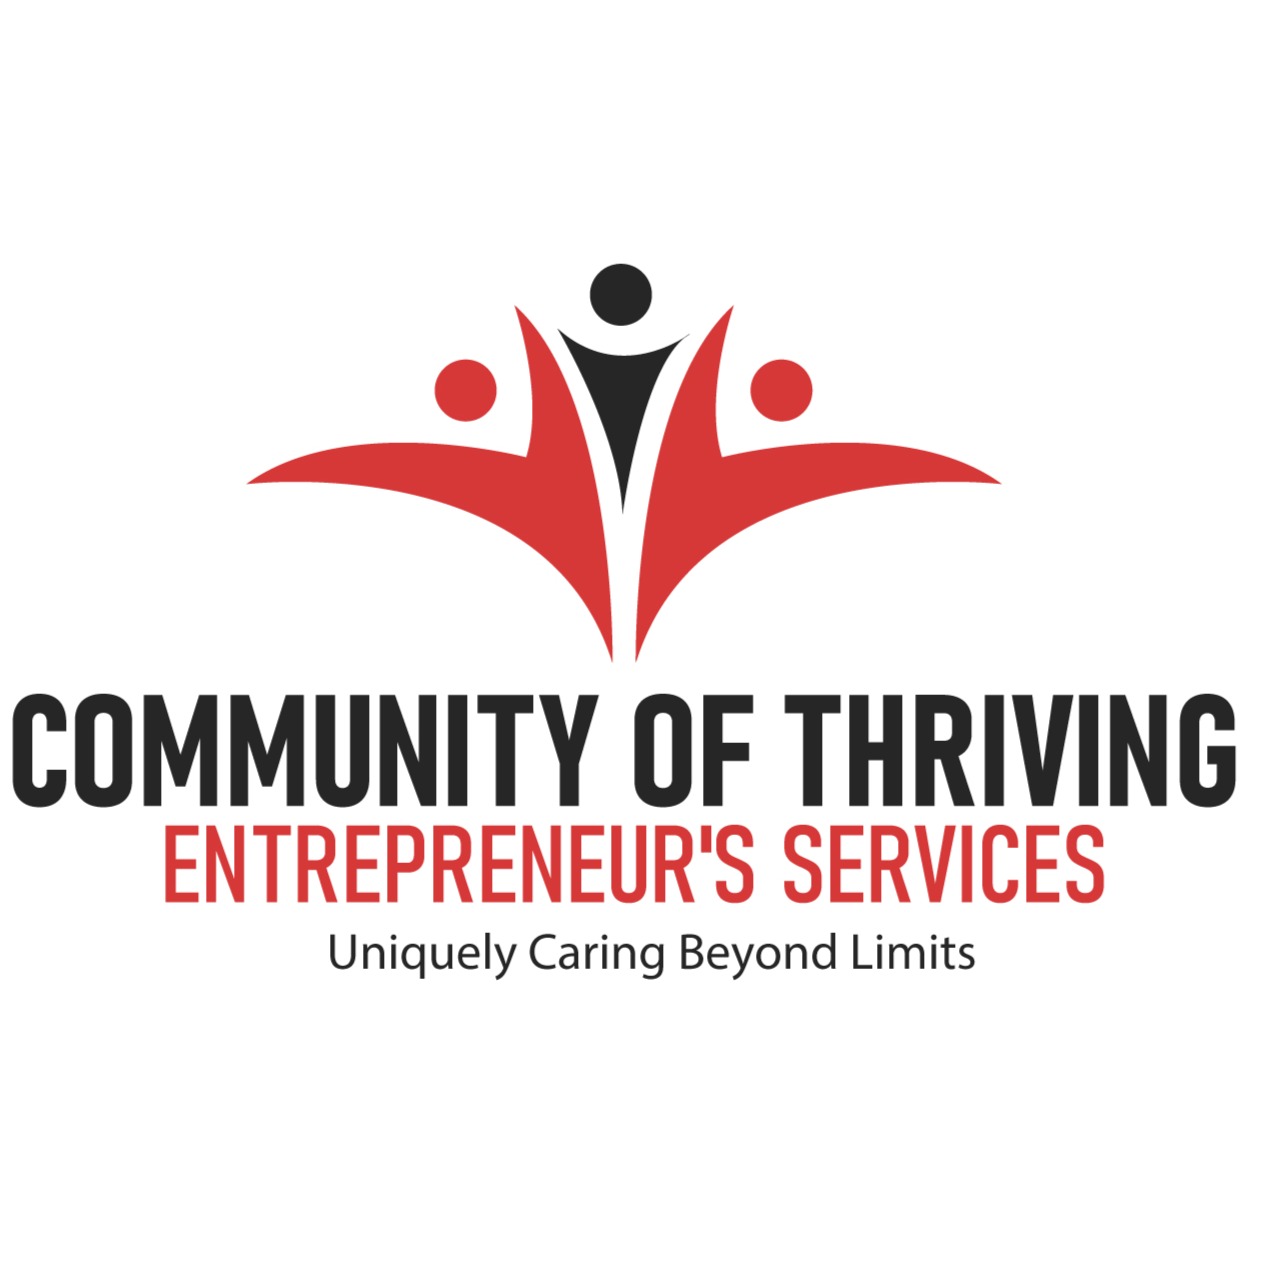 Community Of Thriving Entrepreneur's Services